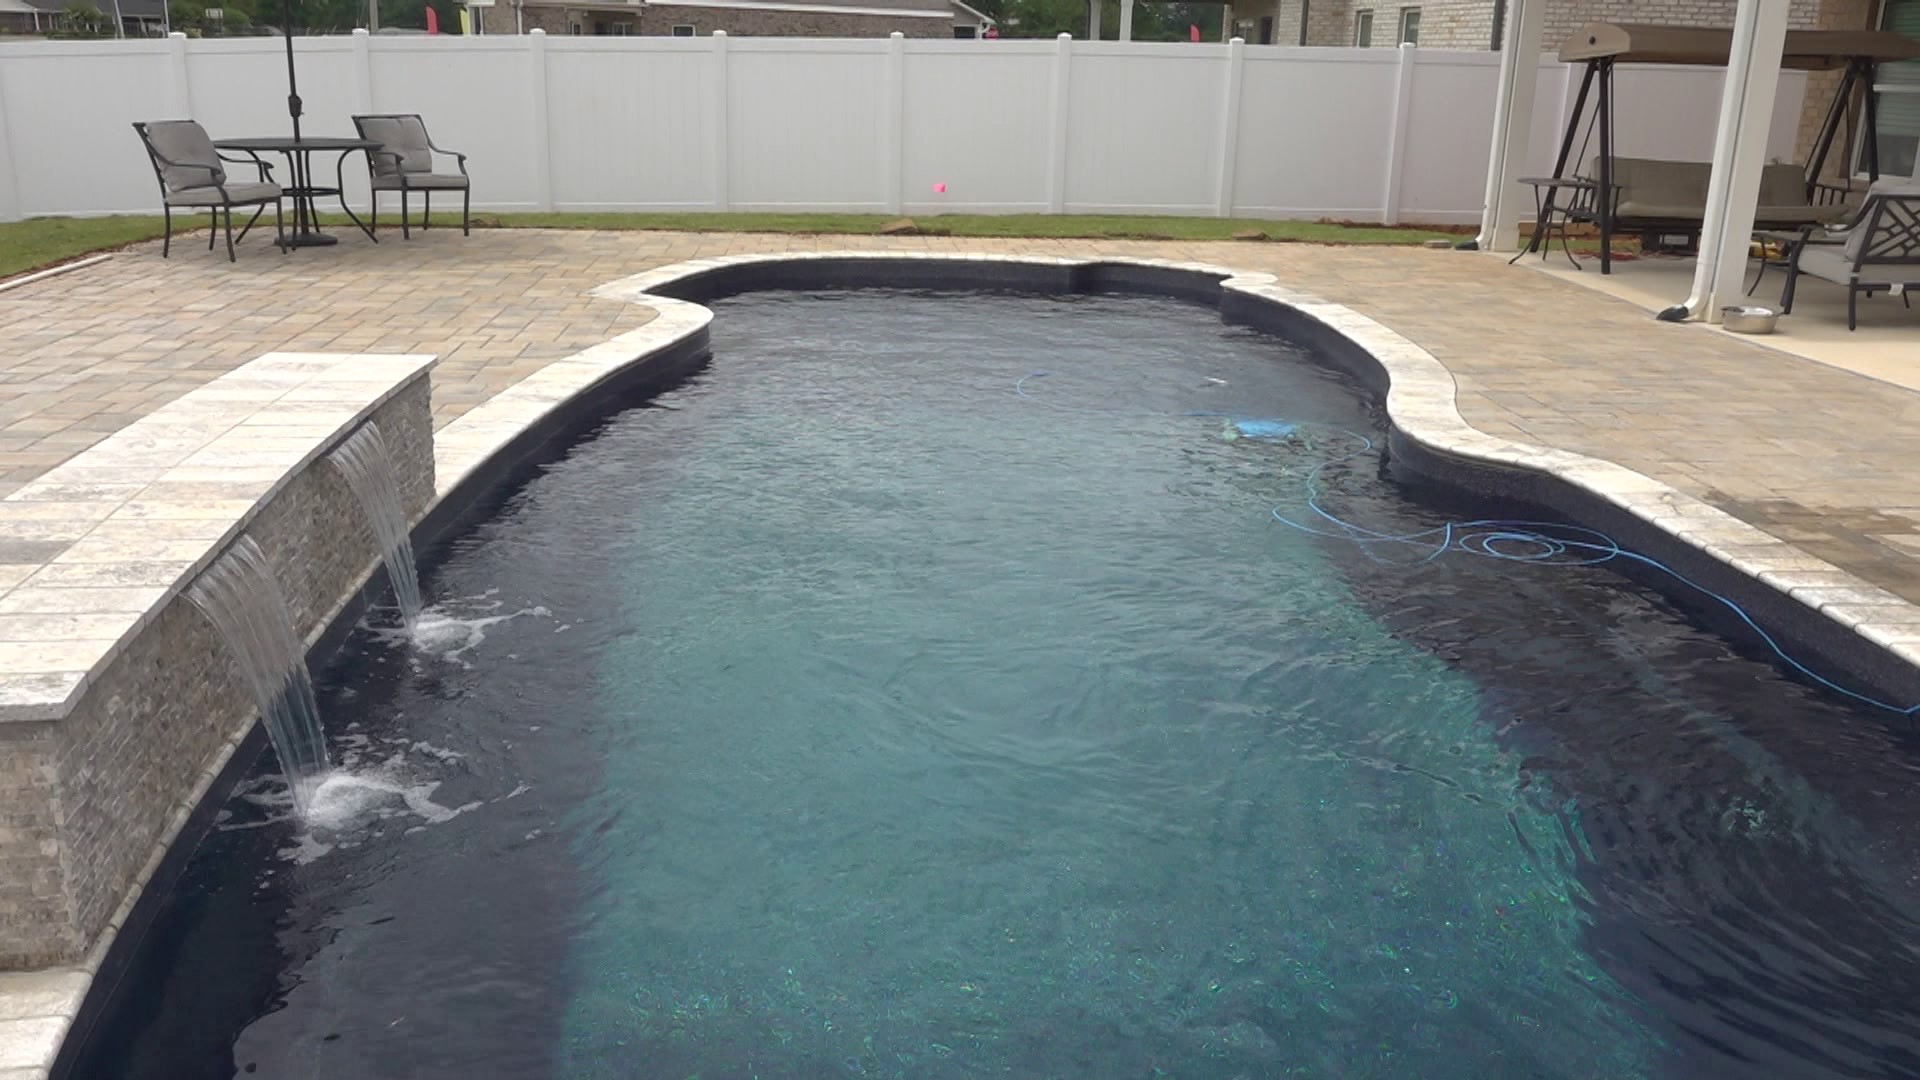 As these temperatures are heating up, many of us are wanting to cool off in the pool but making sure your pool stays clean is extremely important.